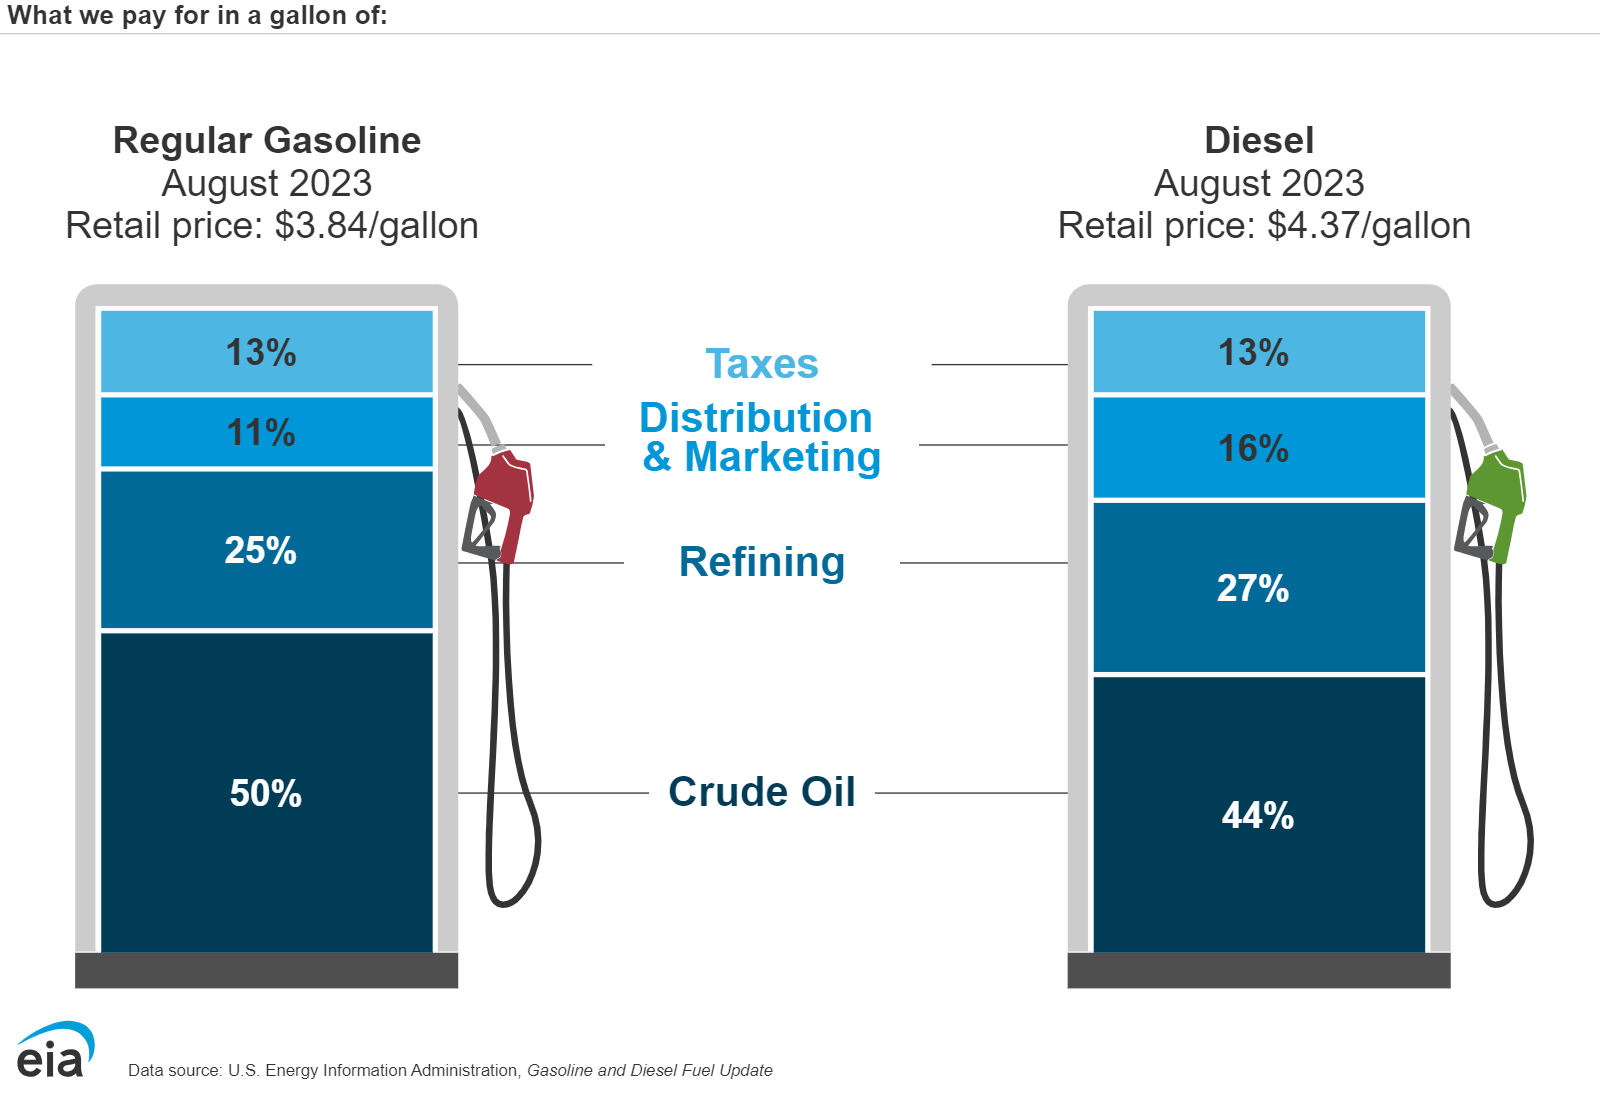 Graphic from U.S. Energy Information Administration displaying 
breakdown in pricing of a gallon of regular gasoline and diesel fuel as of September
2023 including taxes, distributing & marketing, refining, and crude oil.